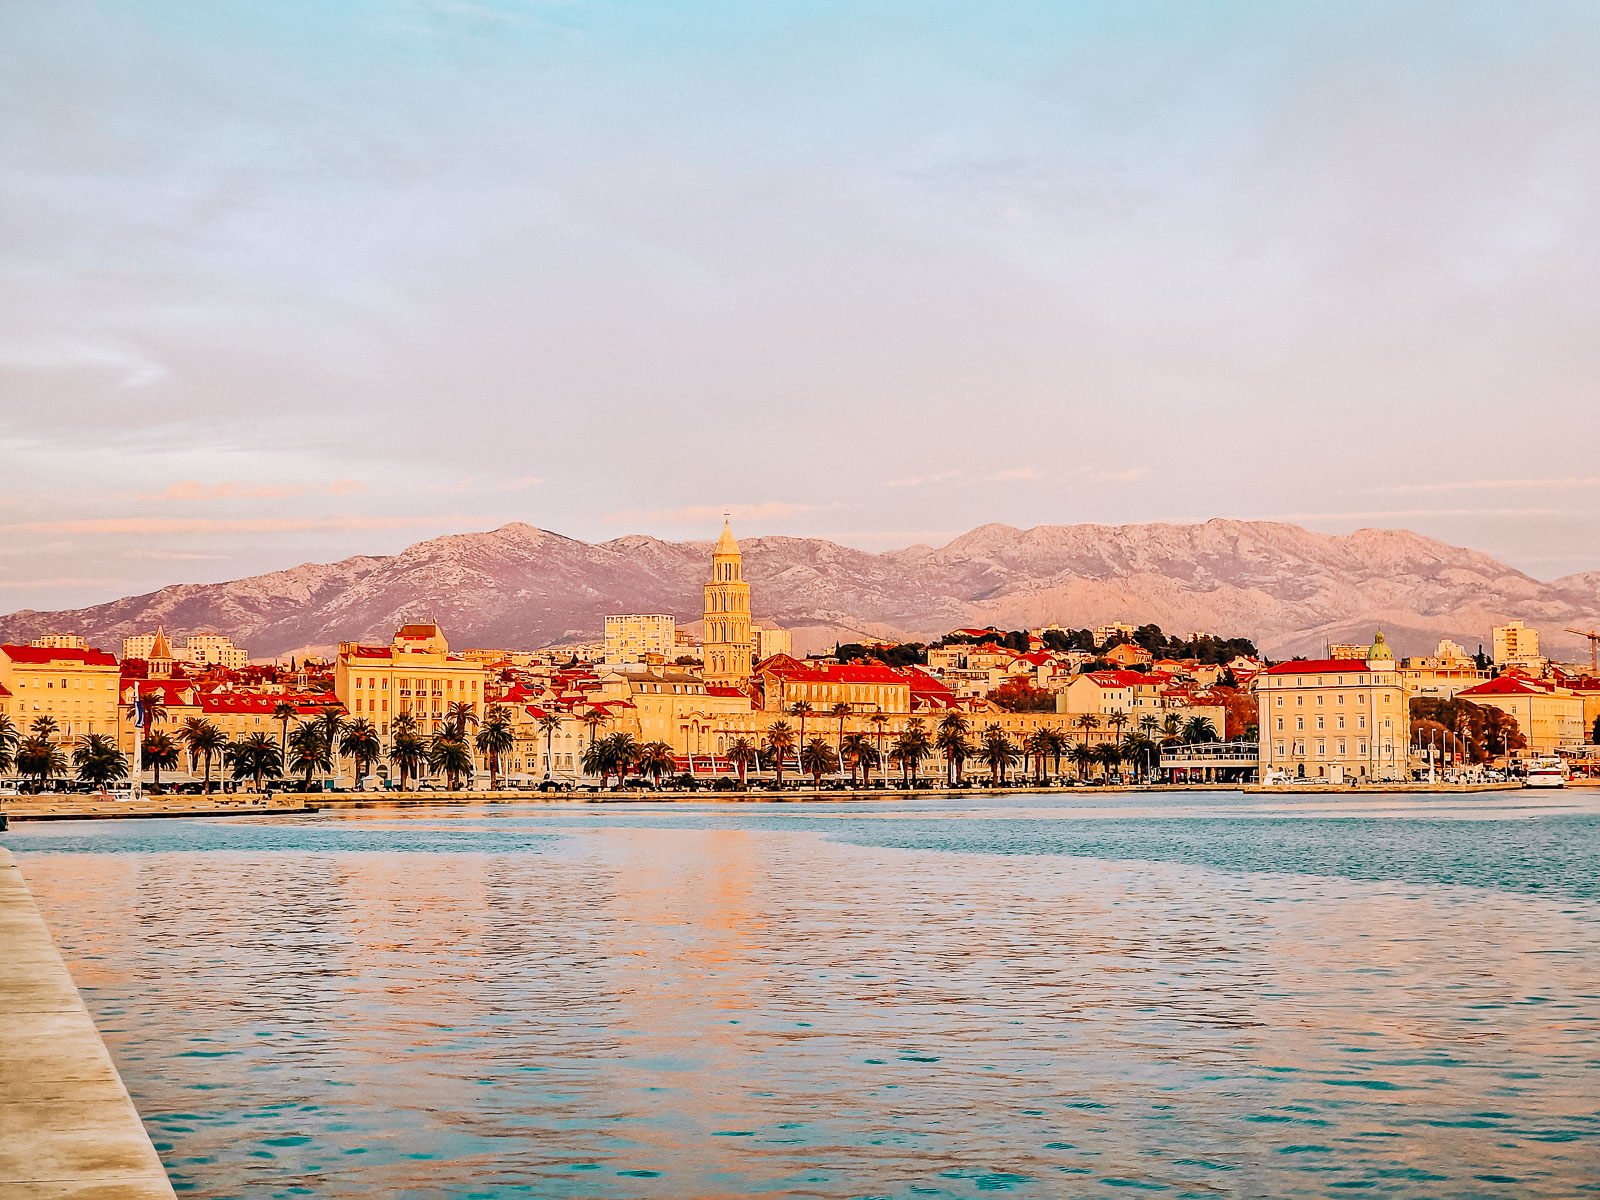 Looking across a still harbour with a town on the opposite side. Orange roof buildings and a tall stone bell tower are on the waterfront with palm trees along the water. Mountains in the background and everything has a pink glow as it's sunset